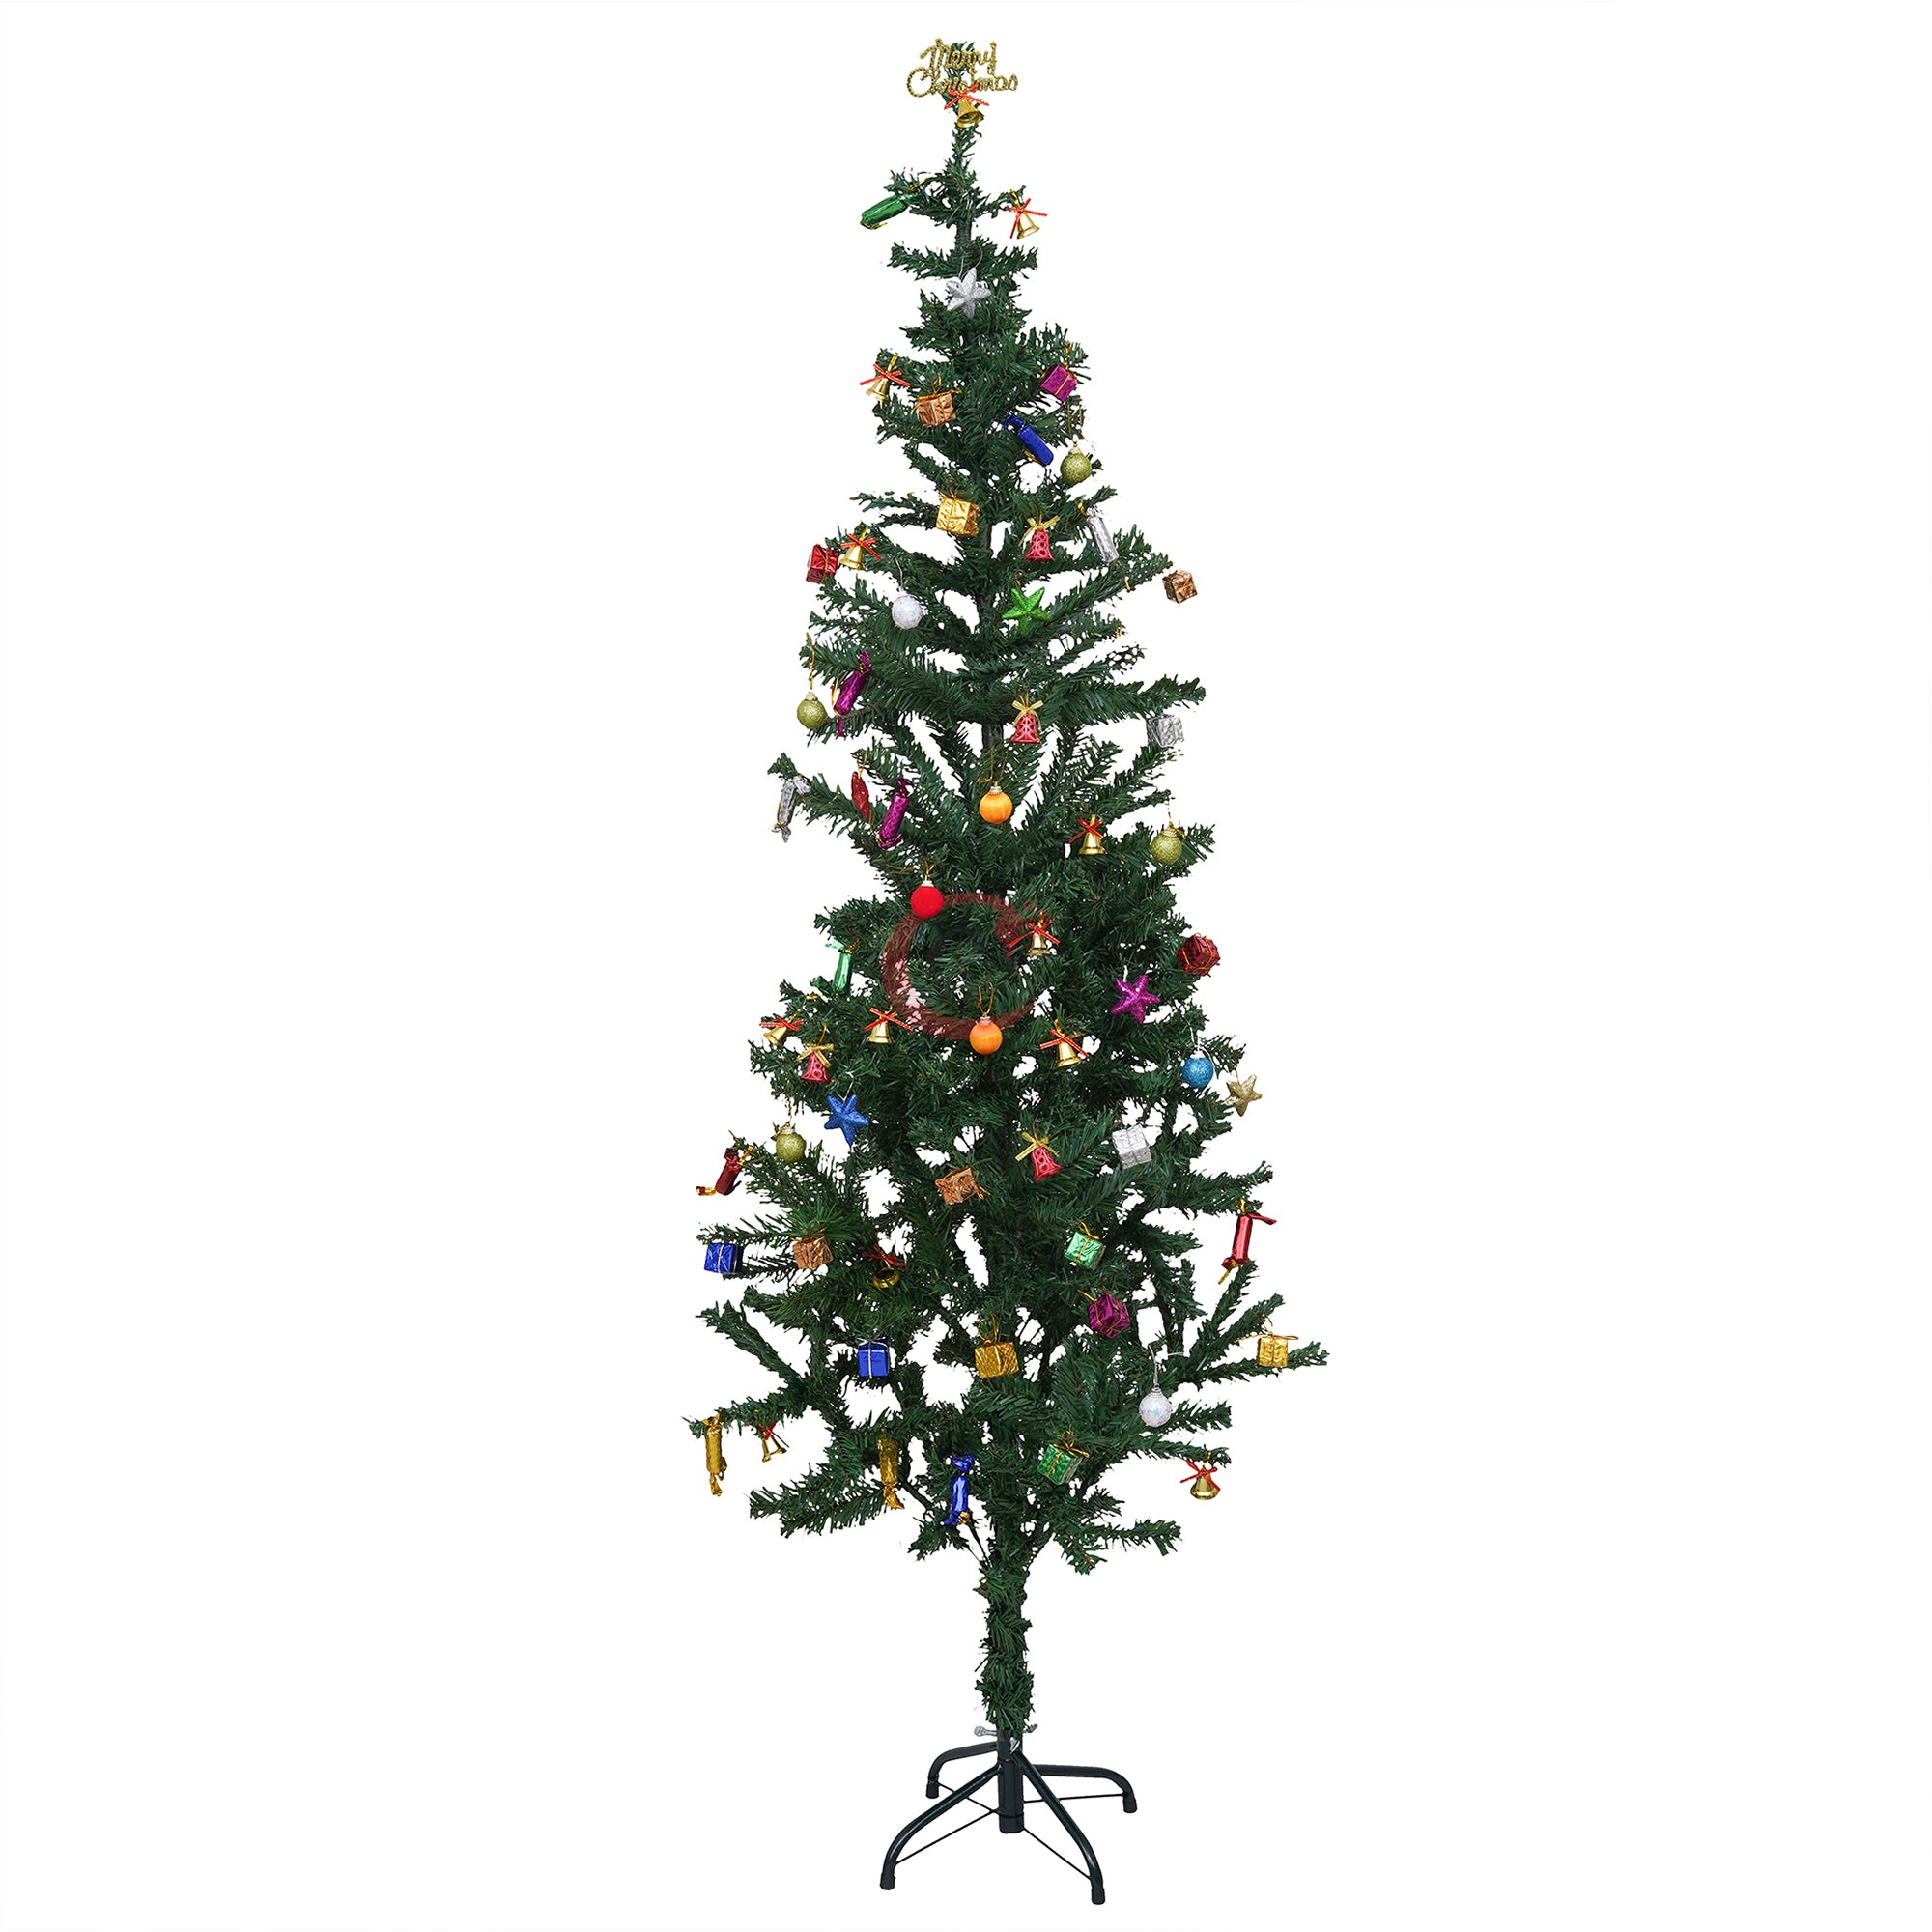 eCraftIndia 5 Feet Green Artificial Christmas Tree Xmas Pine Tree with Stand and 100 Christmas Decoration Ornaments Props - Merry Christmas Decoration Item for Home, Office, and Church 2